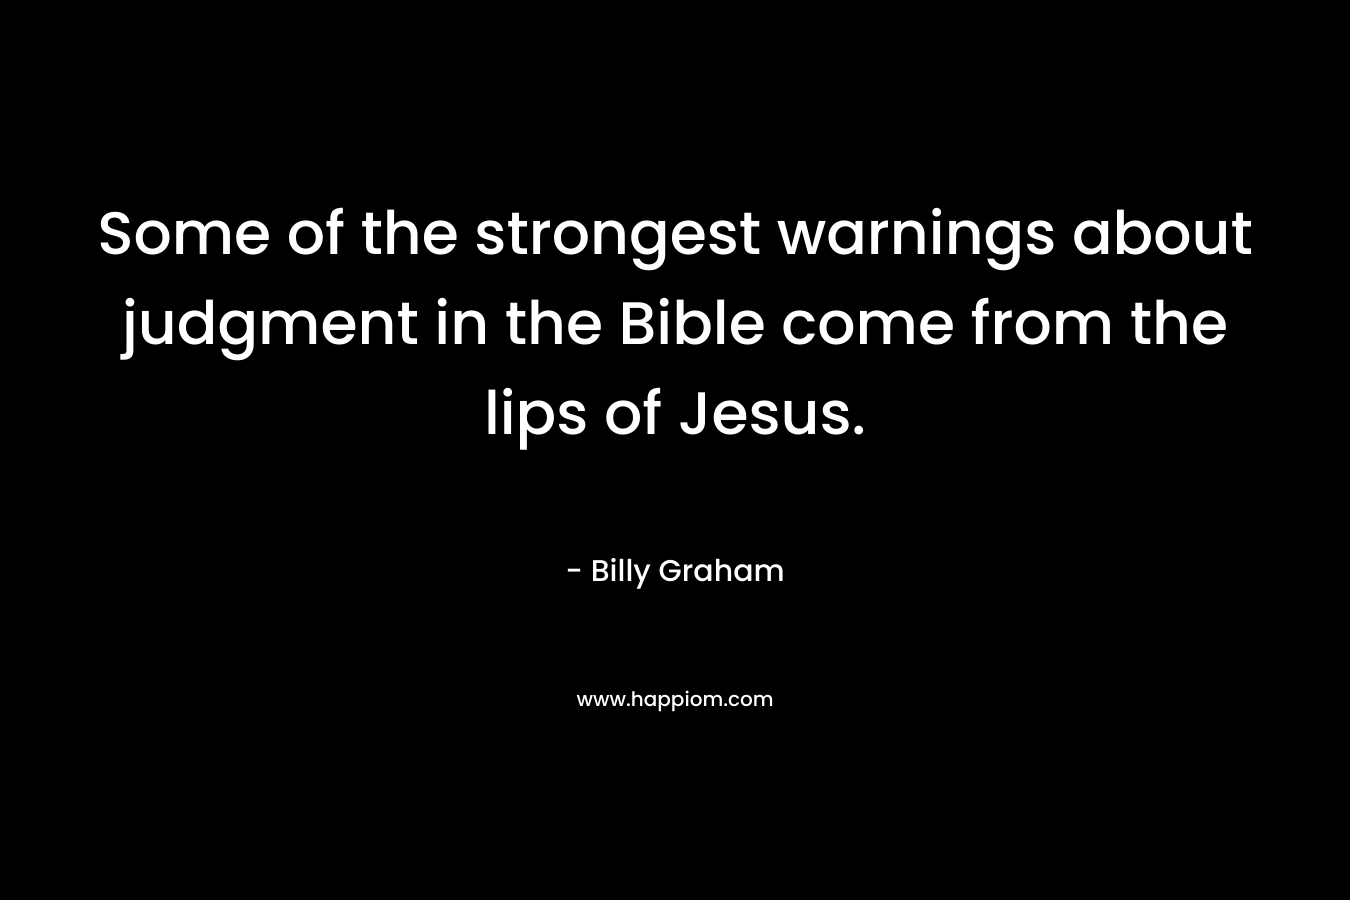 Some of the strongest warnings about judgment in the Bible come from the lips of Jesus. – Billy Graham